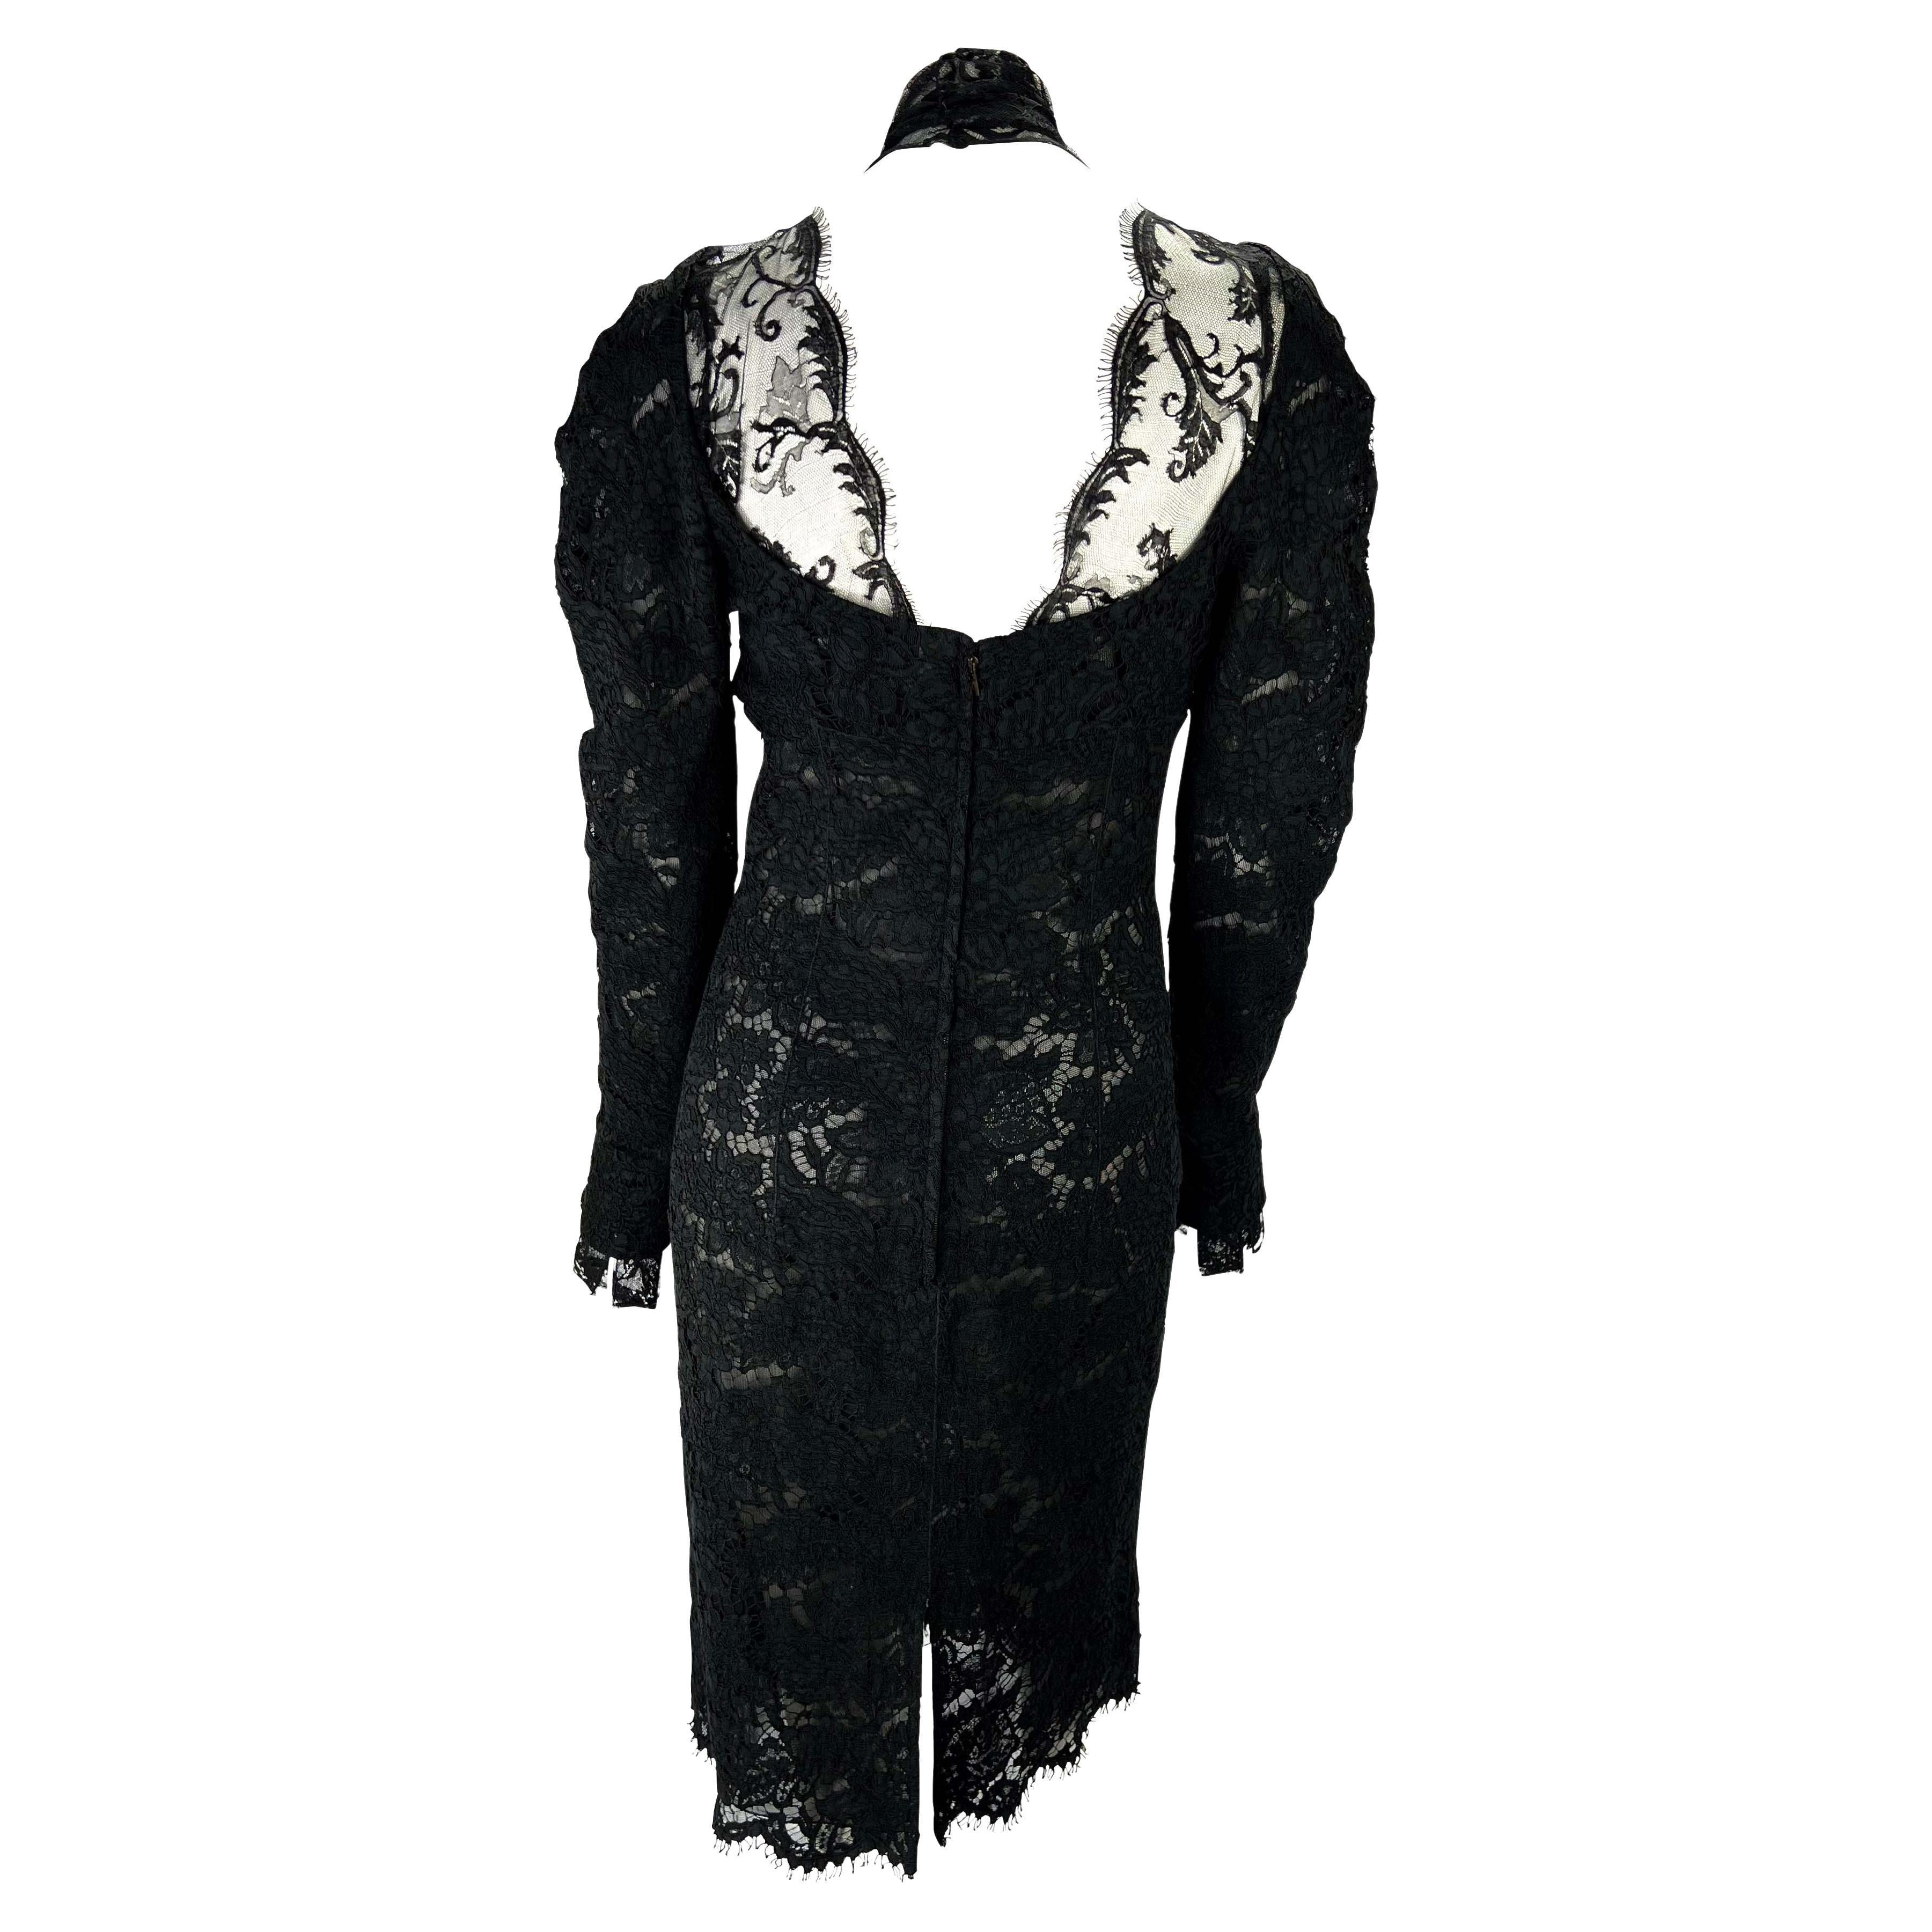 F/W 2002 Yves Saint Laurent by Tom Ford Runway Sheer Black Lace Poet's Dress For Sale 1